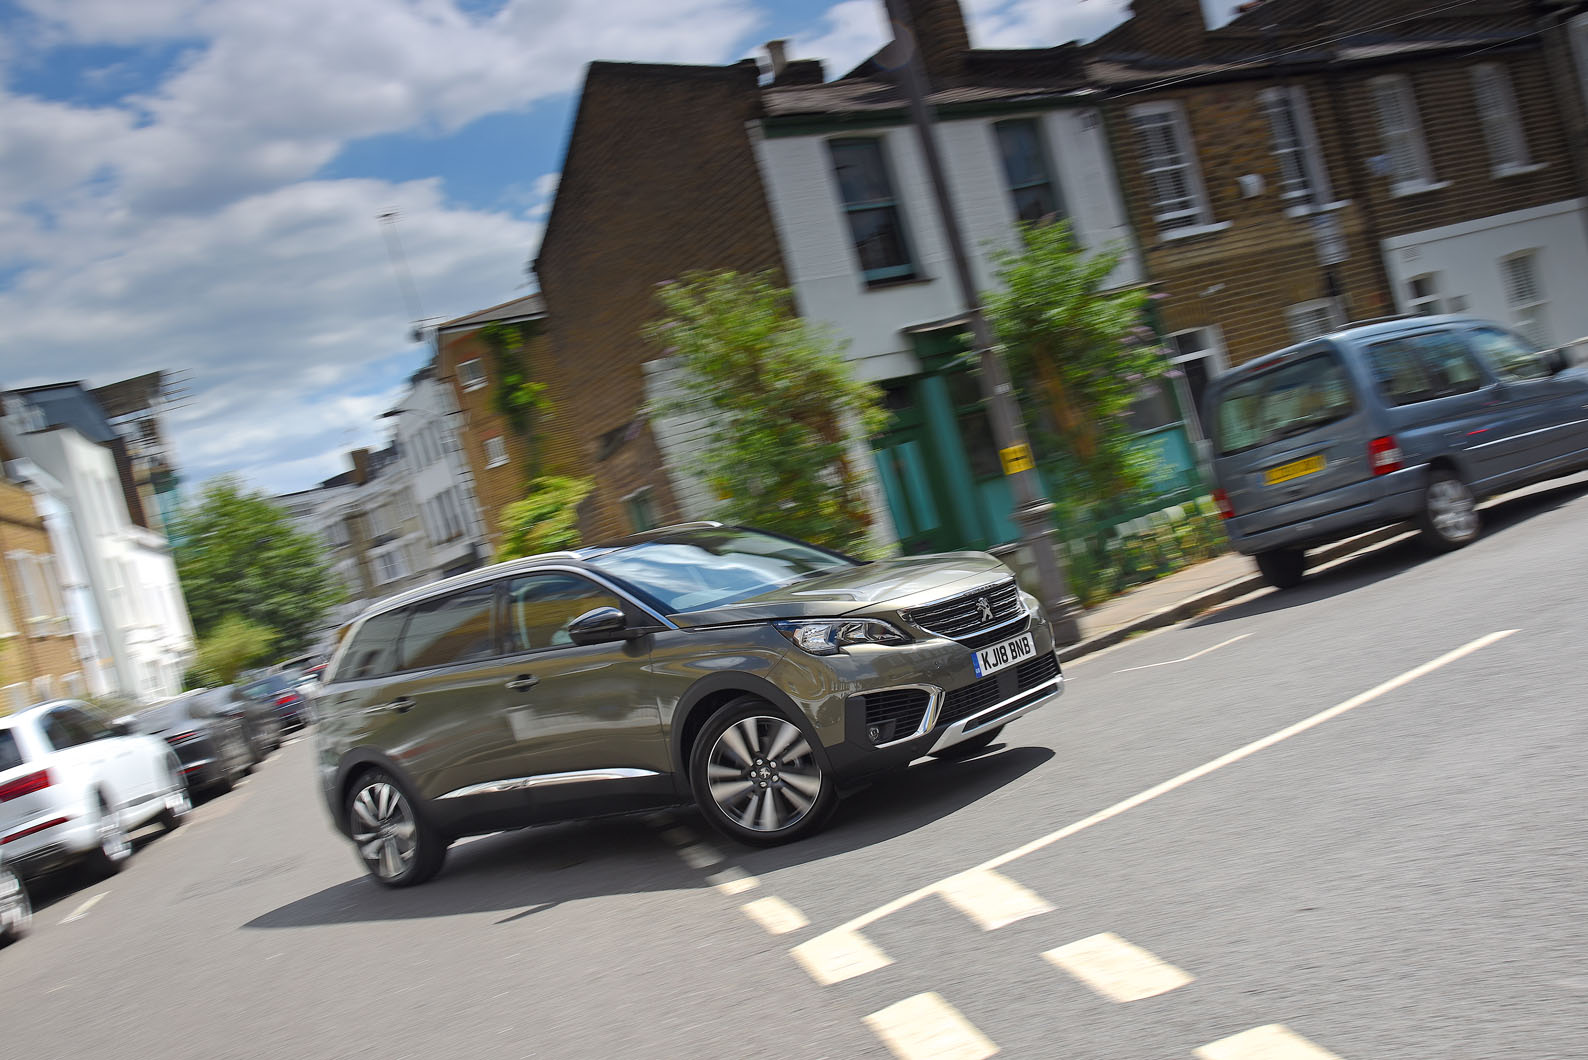 Peugeot 5008 long-term review: six months with a seven-seat MPV